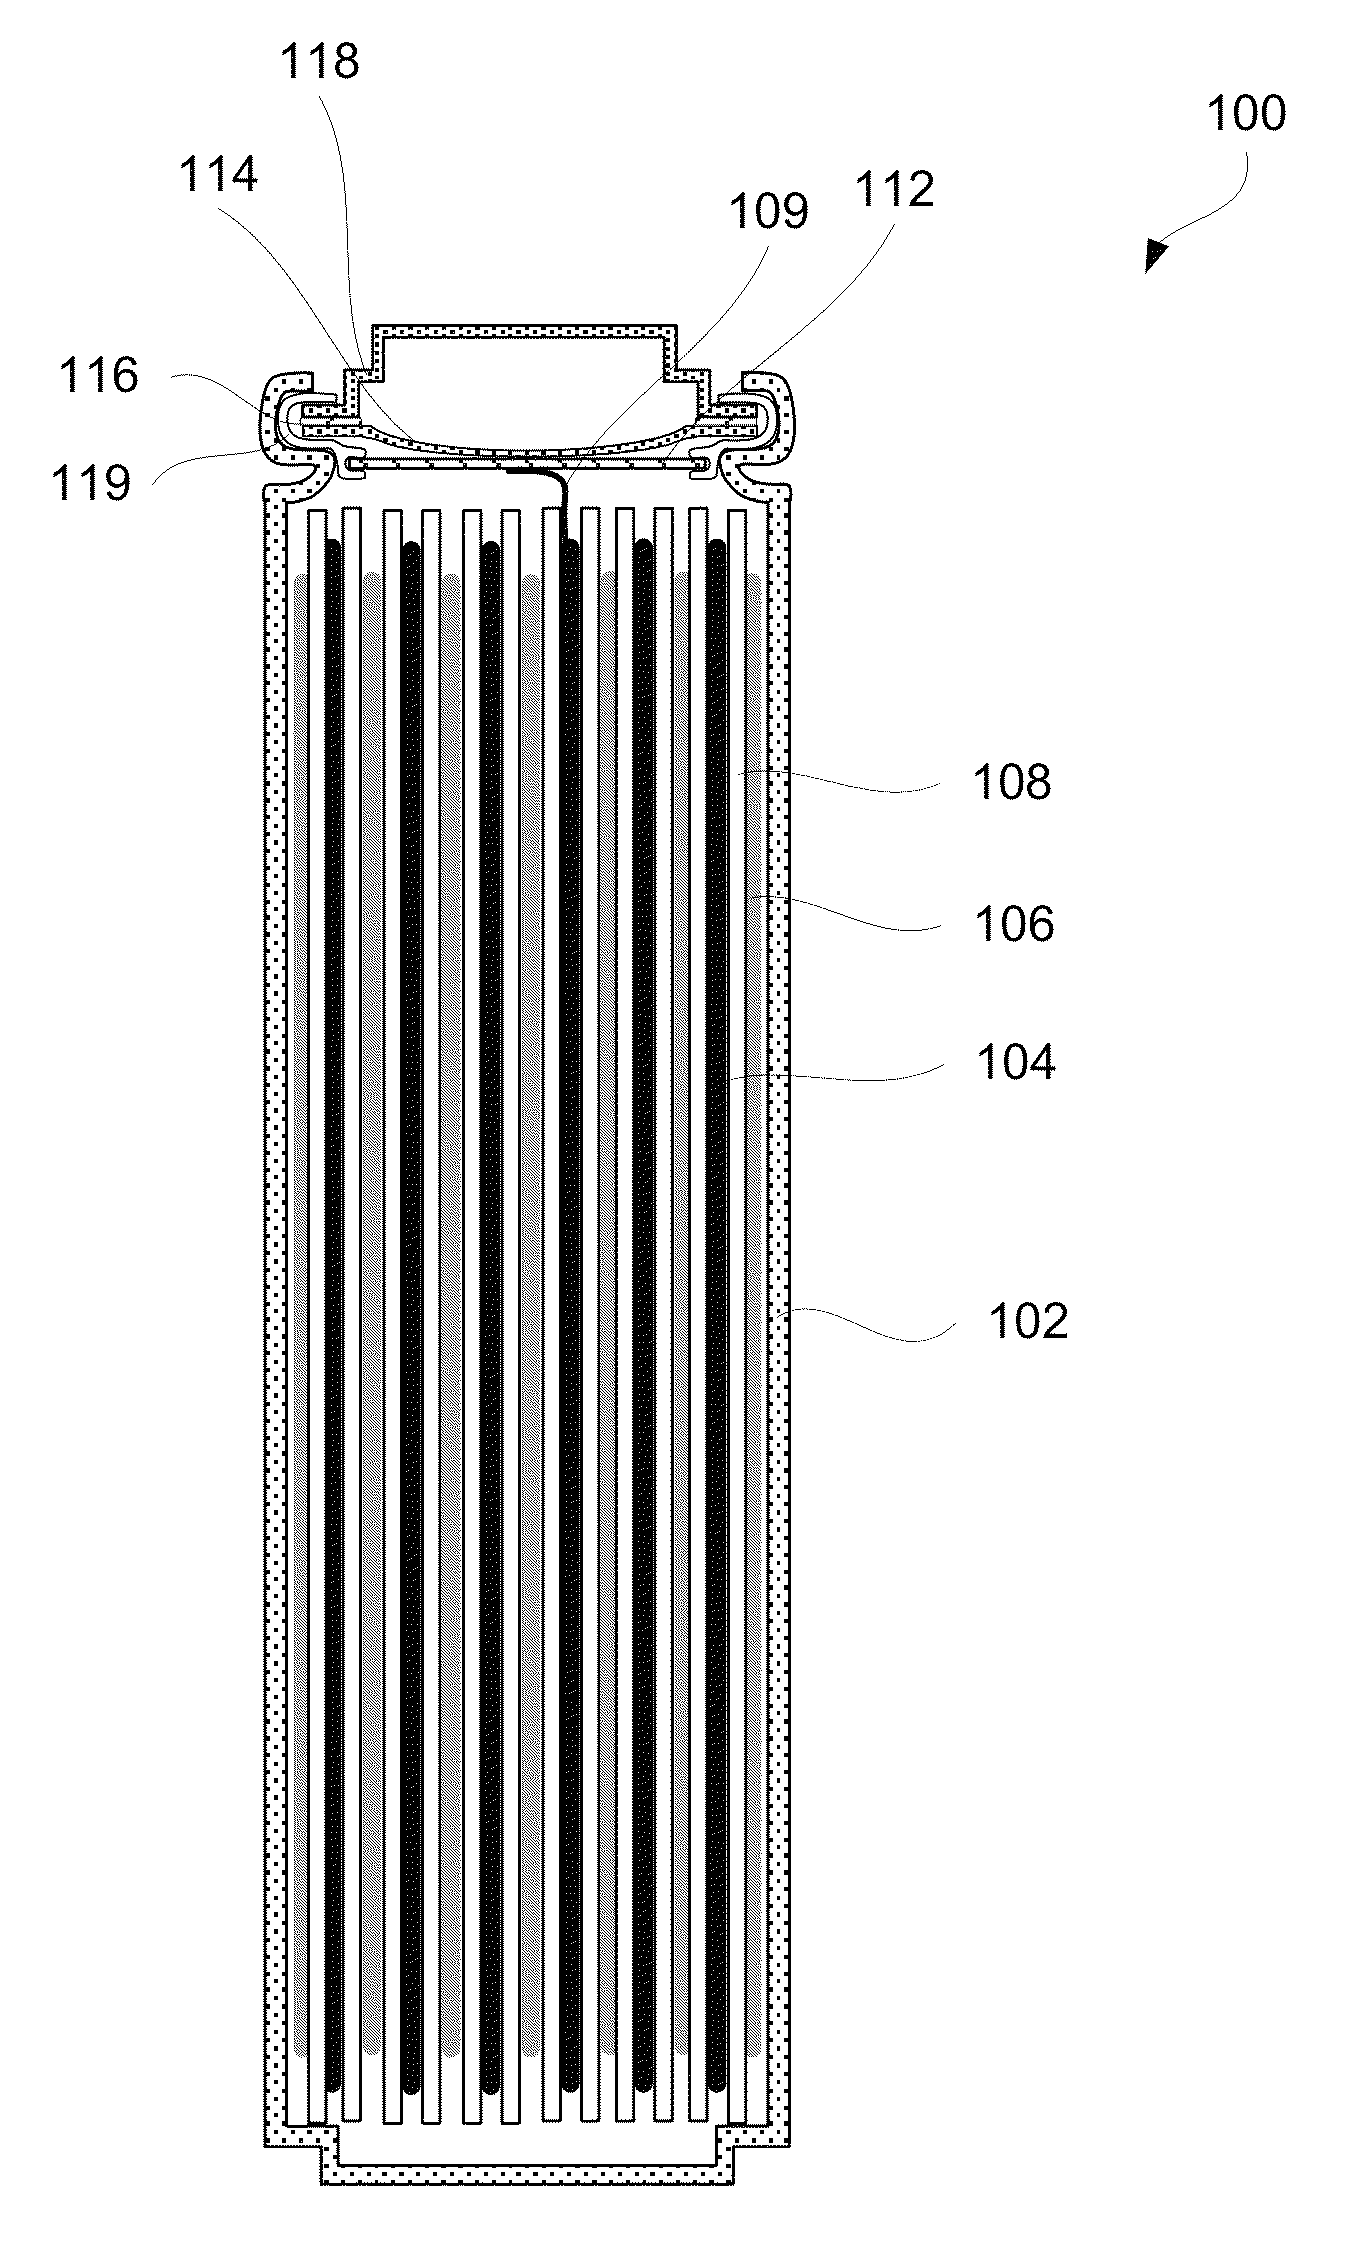 Electrolytes including fluorinated solvents for use in electrochemical cells